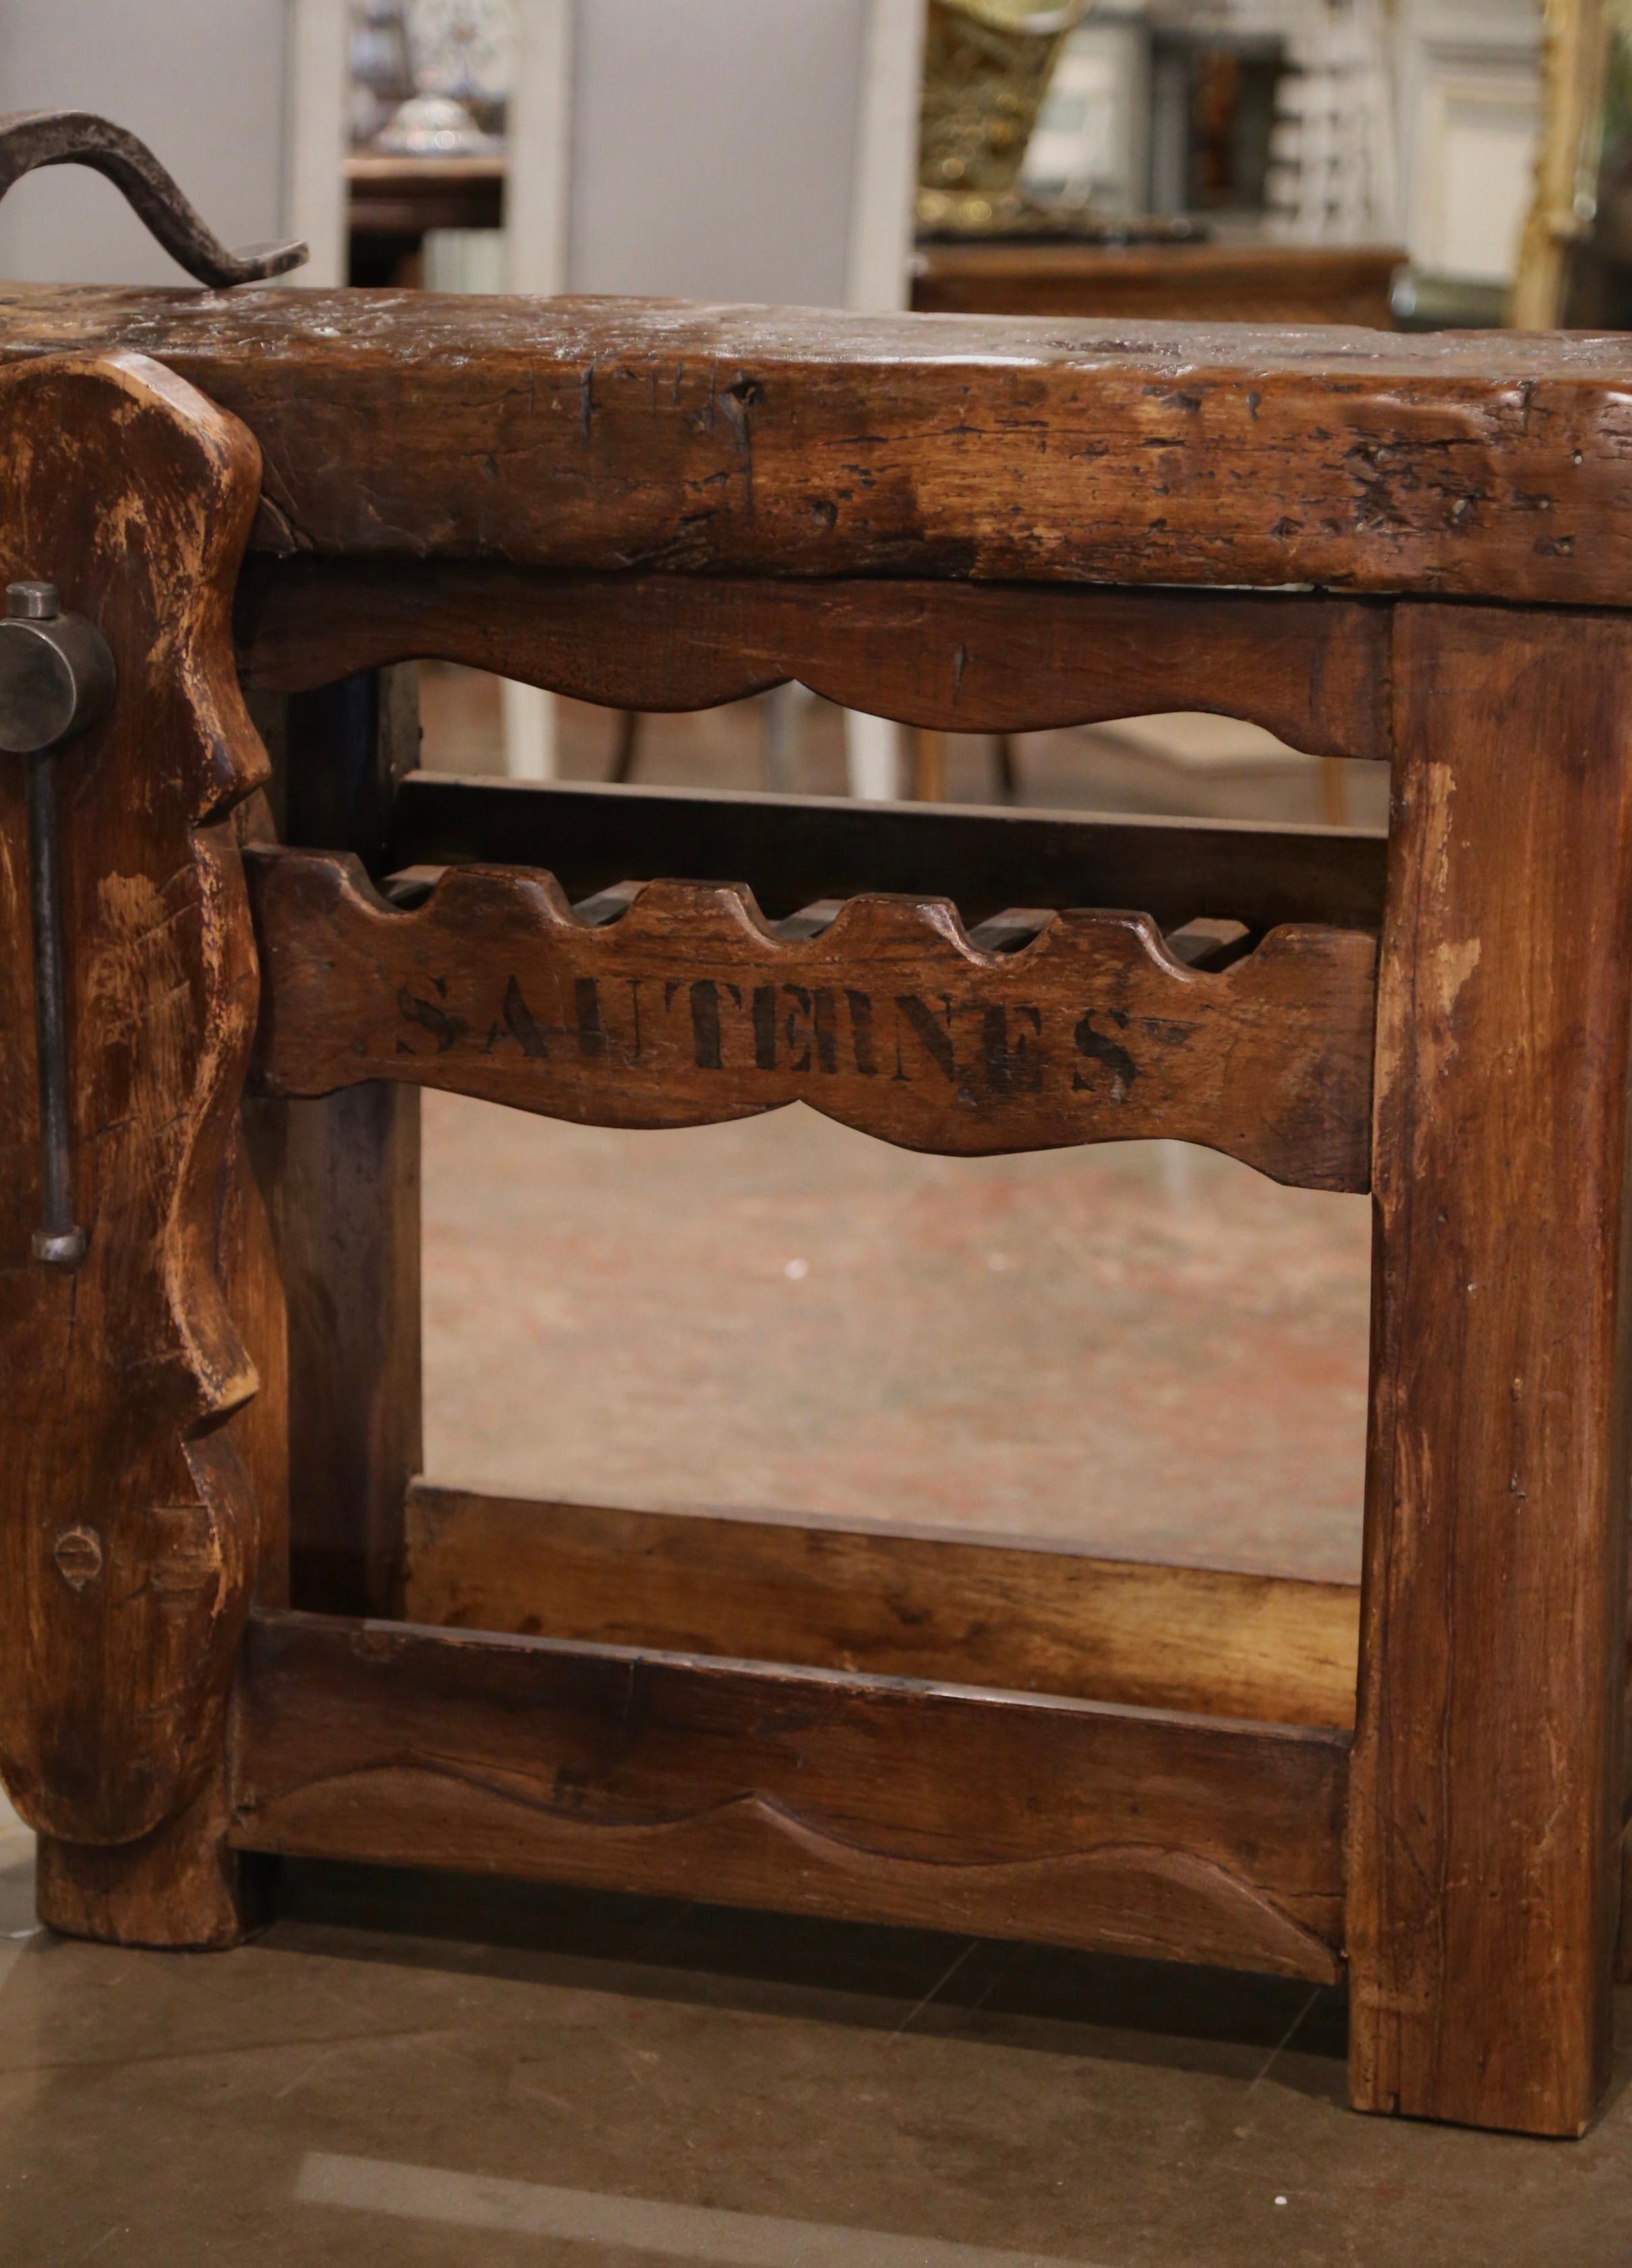 This antique table was crafted in the Poitou region of France, circa 1880. The rustic, oak piece decorated with the word 